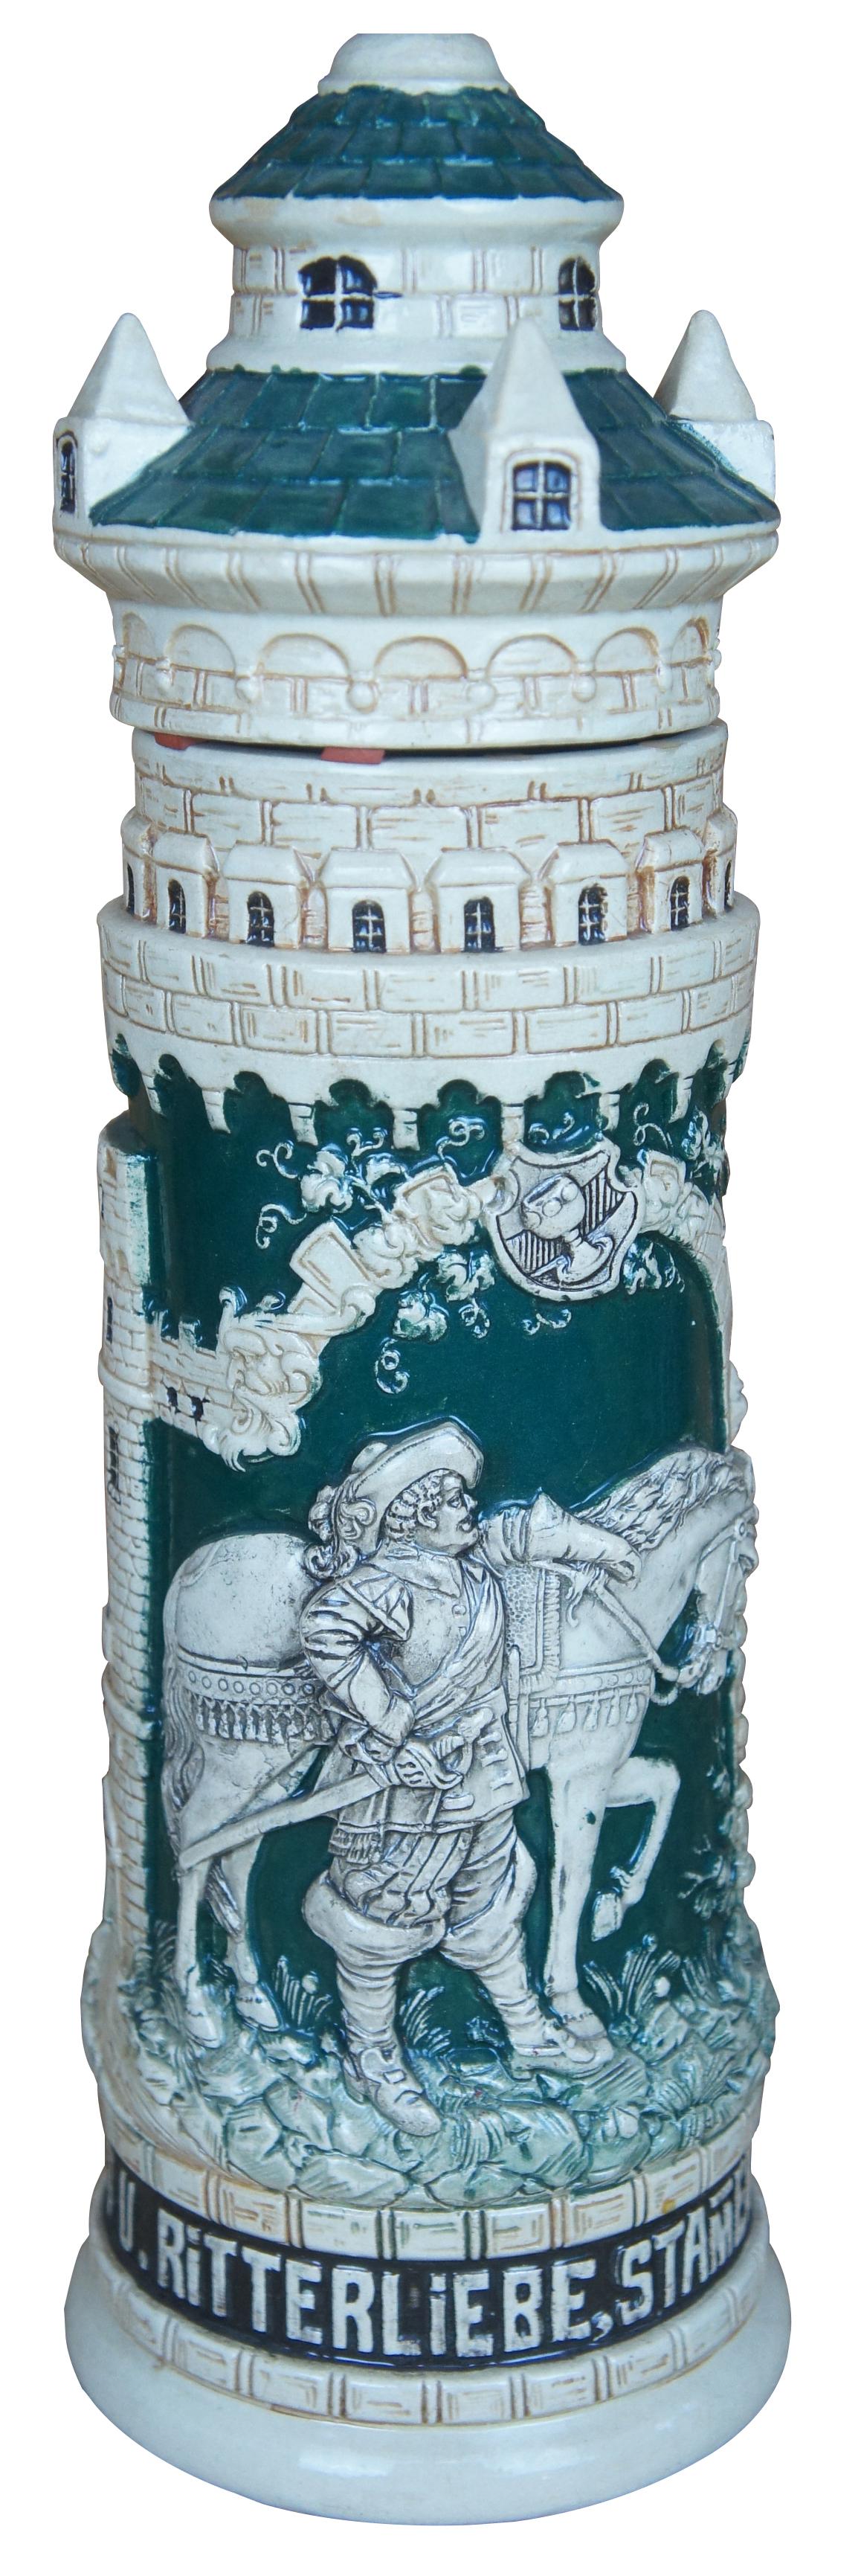 Vintage German earthenware pottery stein featuring high relief form depicting a noble woman in a tower addressing a courtly knight on horse. Text reads: “Rebensaft u. Ritterliebe stammen aus edlen Trieben.” (Wine and knightly love come from noble